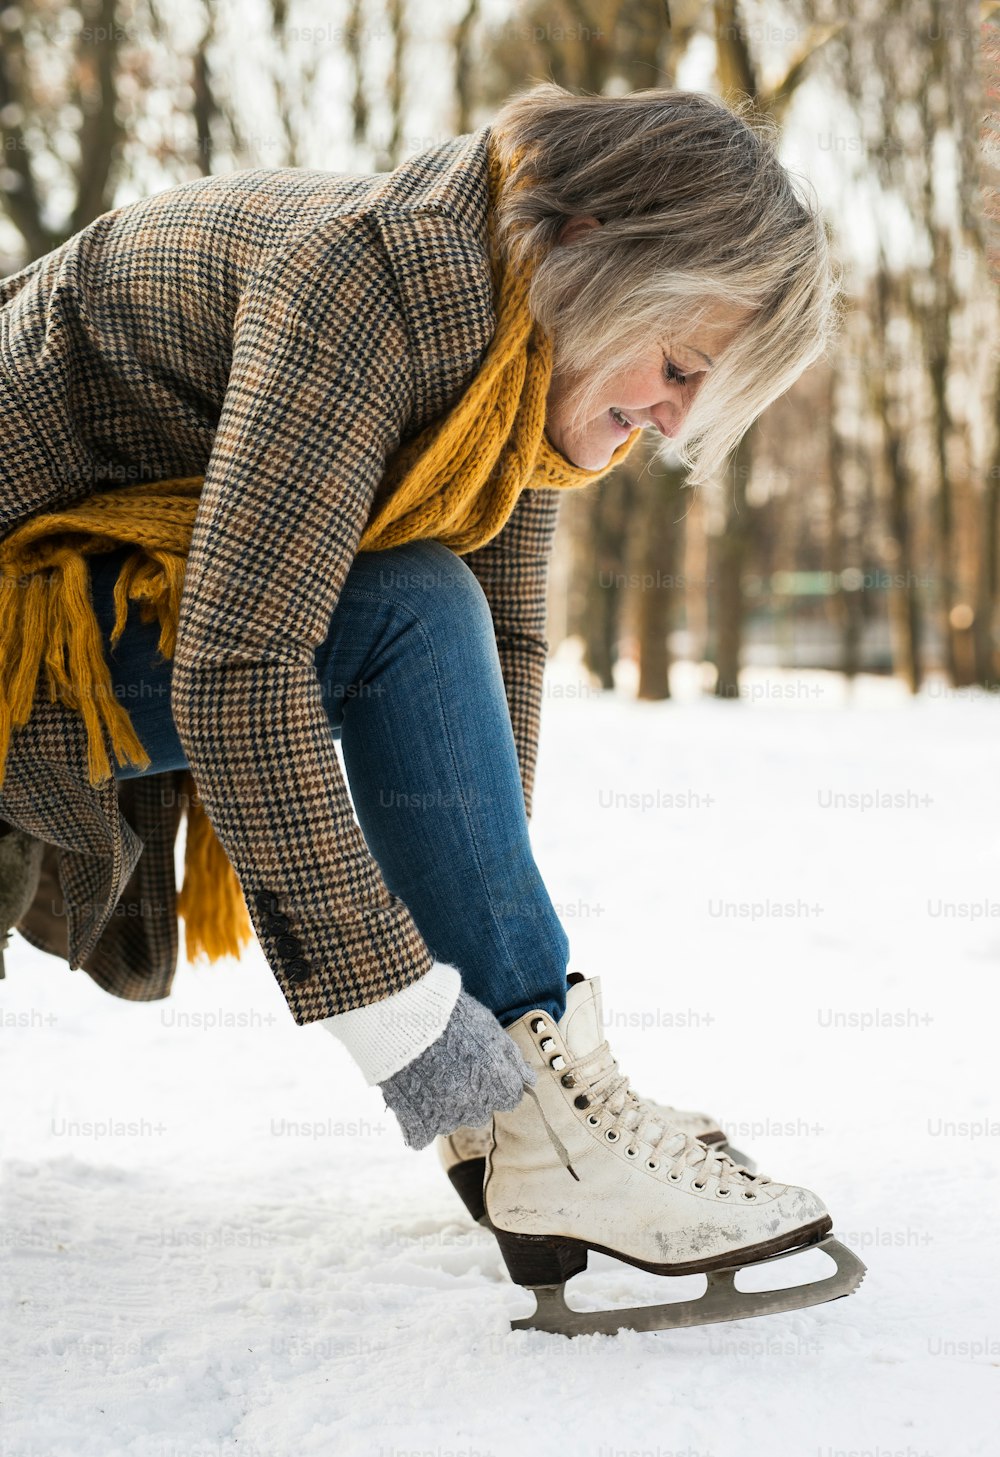 Beautiful senior woman in winter clothes putting on old ice skates. Snowy winter nature.